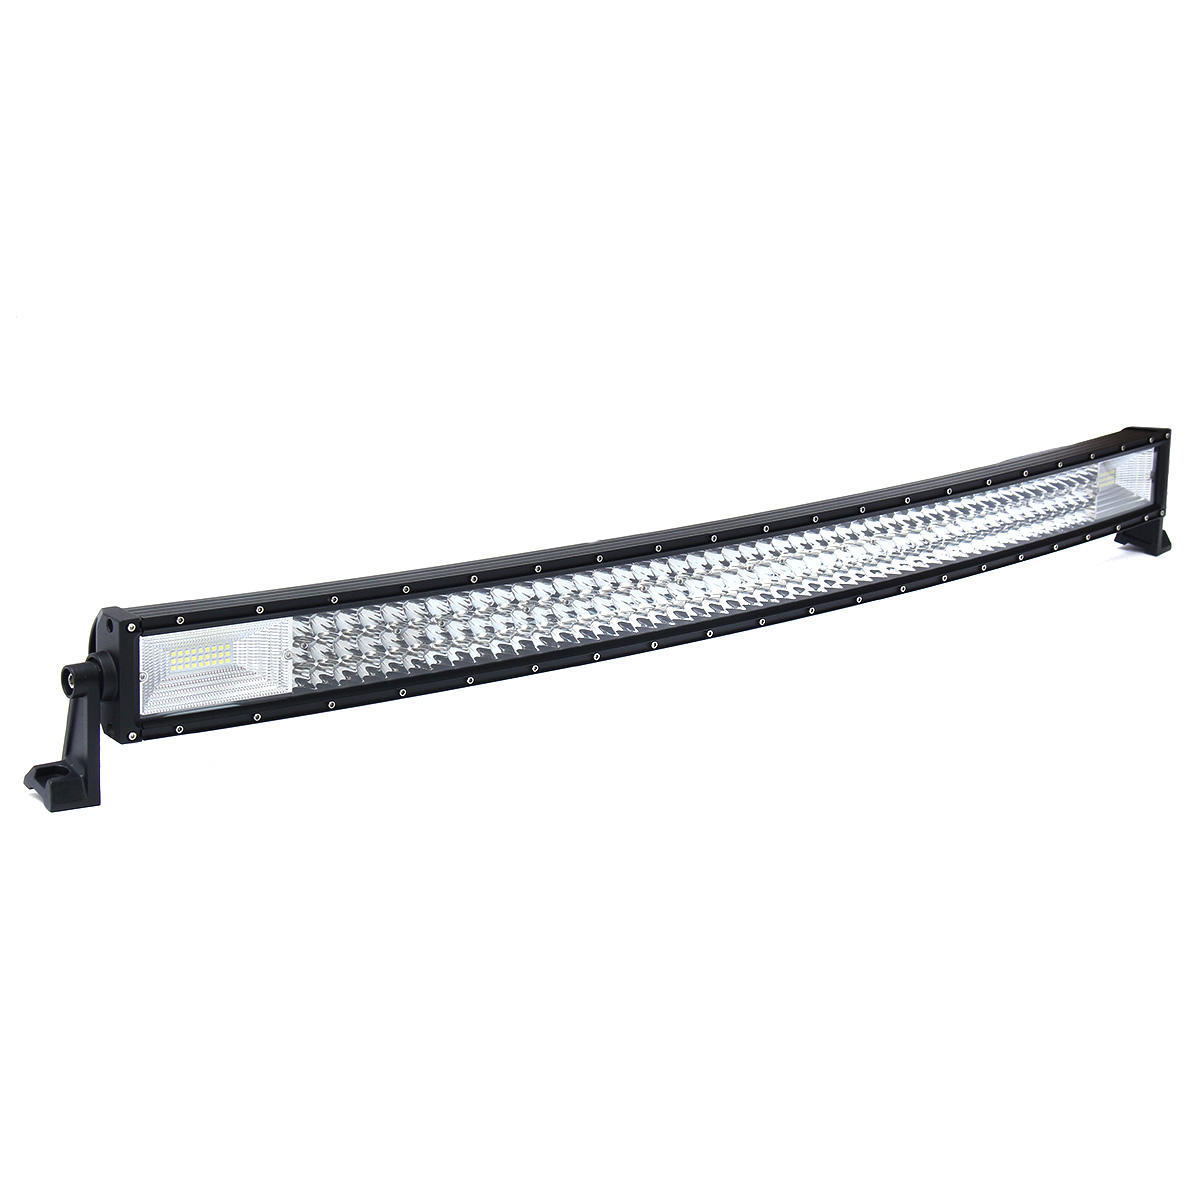 Image of 42Inch 7D LED Work Light Bars TRI-ROW Curved Combo Beam 594W 59400LM for Off Road Boat Truck SUV